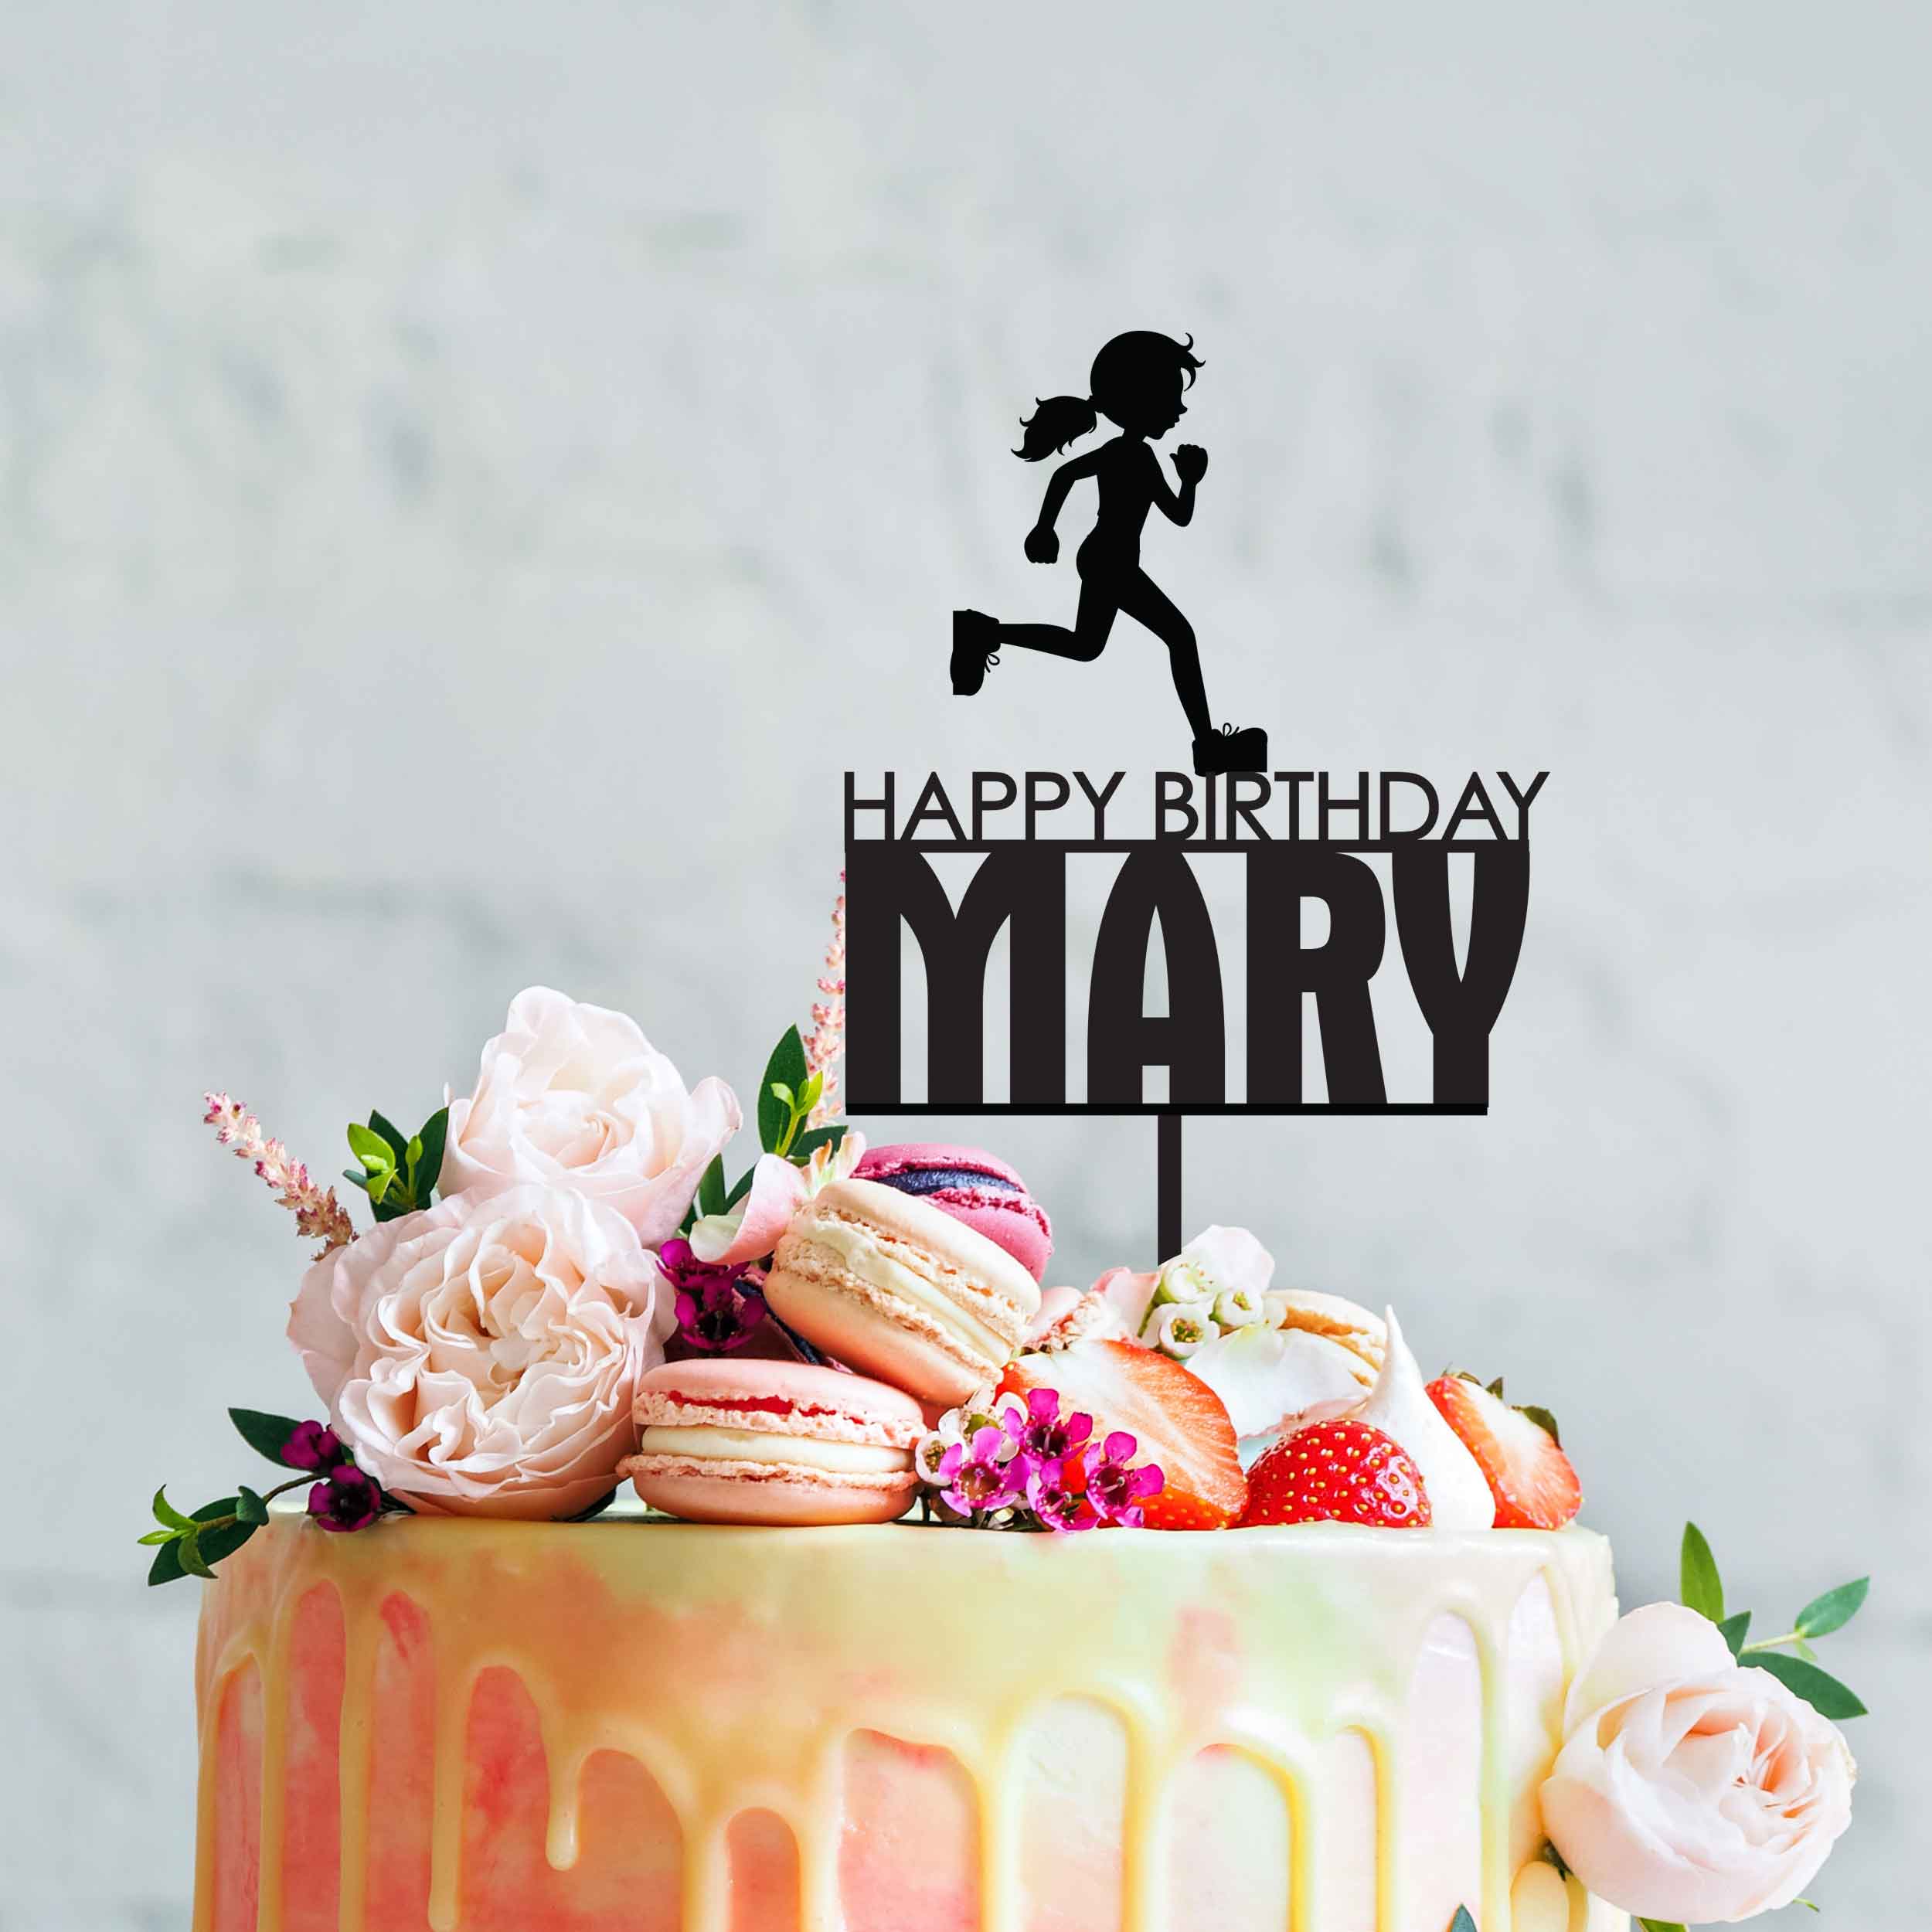 Coolest DIY Birthday Cakes | Track and Field Cakes